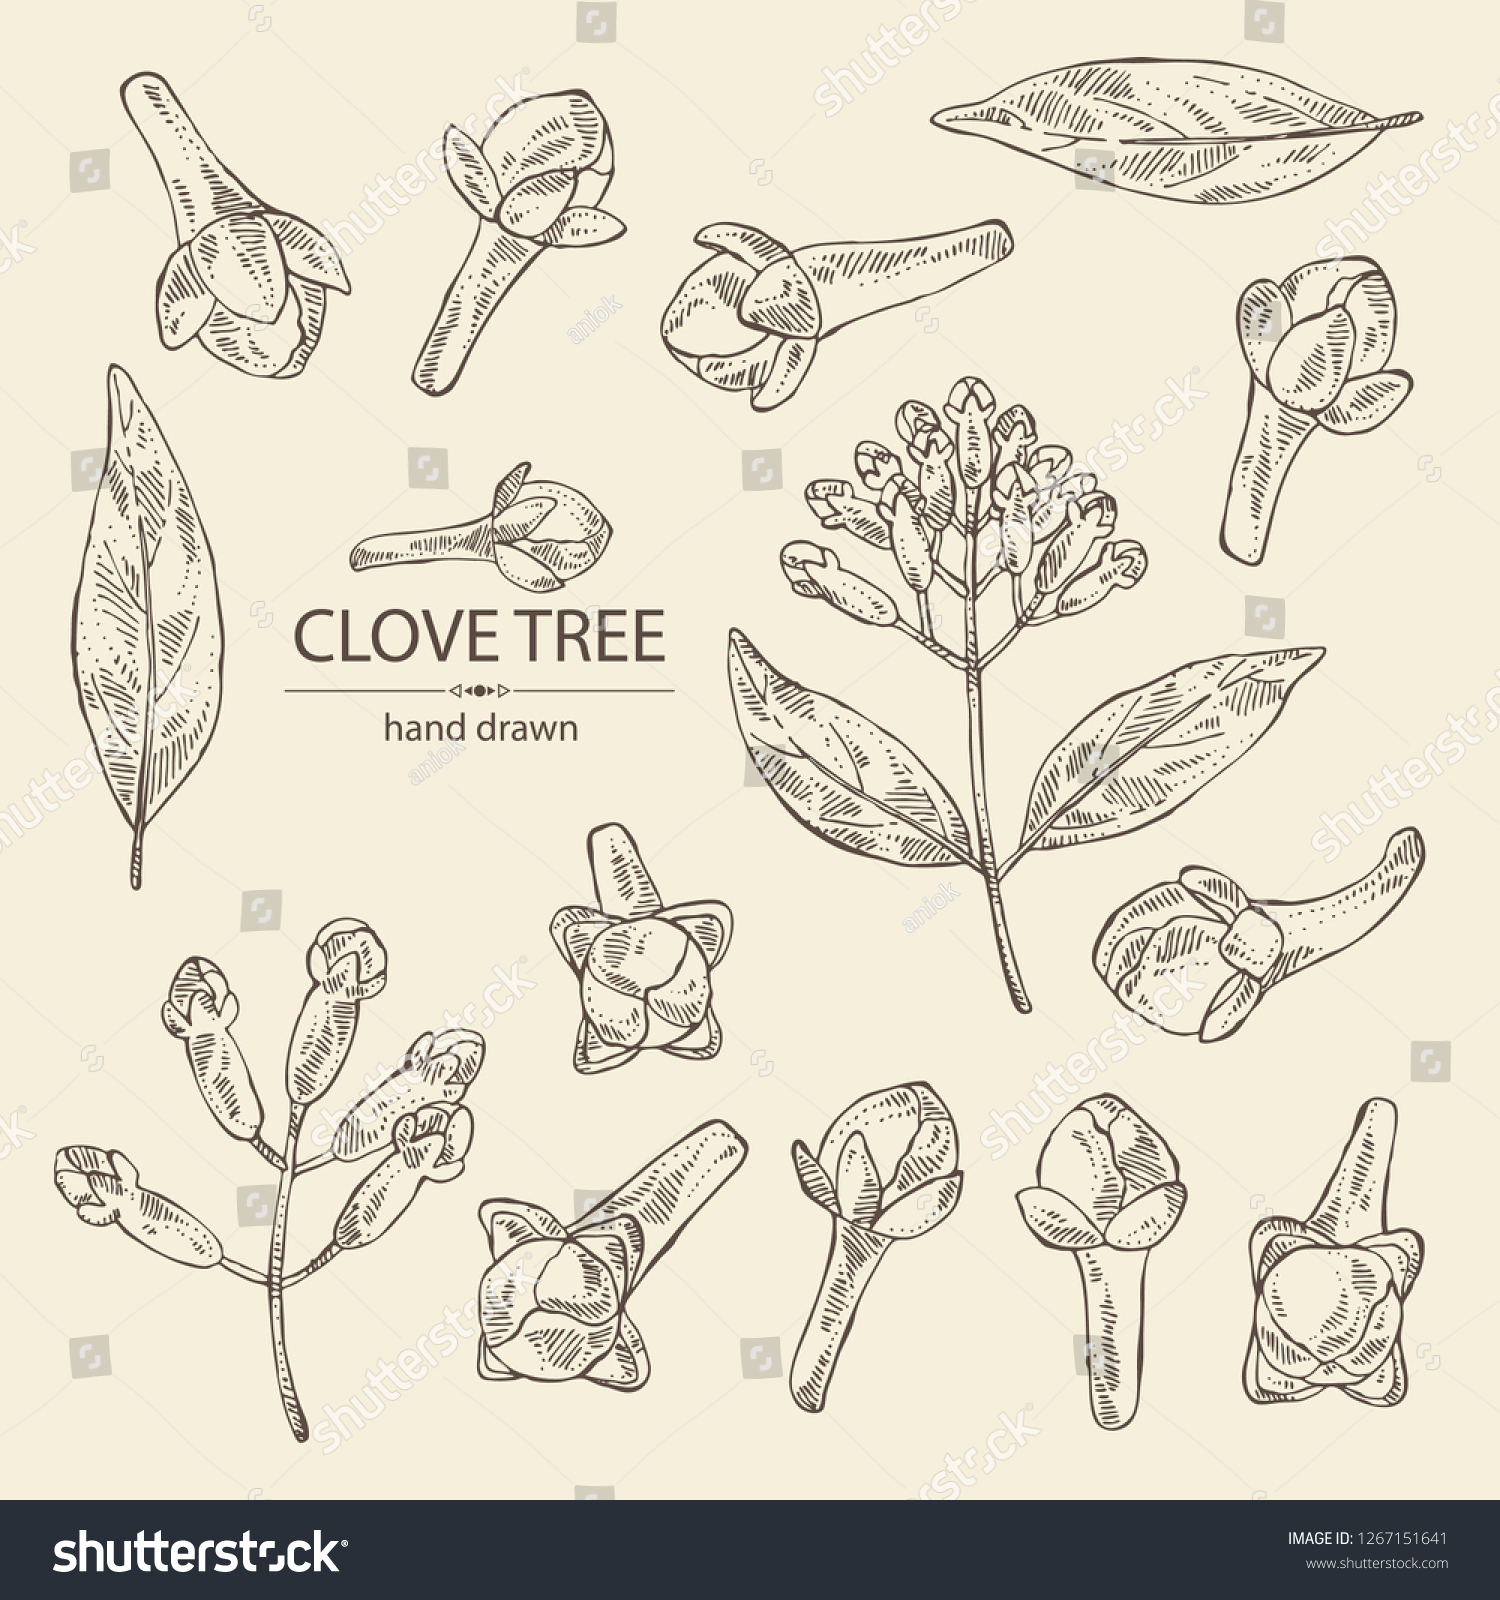 Collection of clove tree: buds and leaves. Vector hand drawn illustration #1267151641